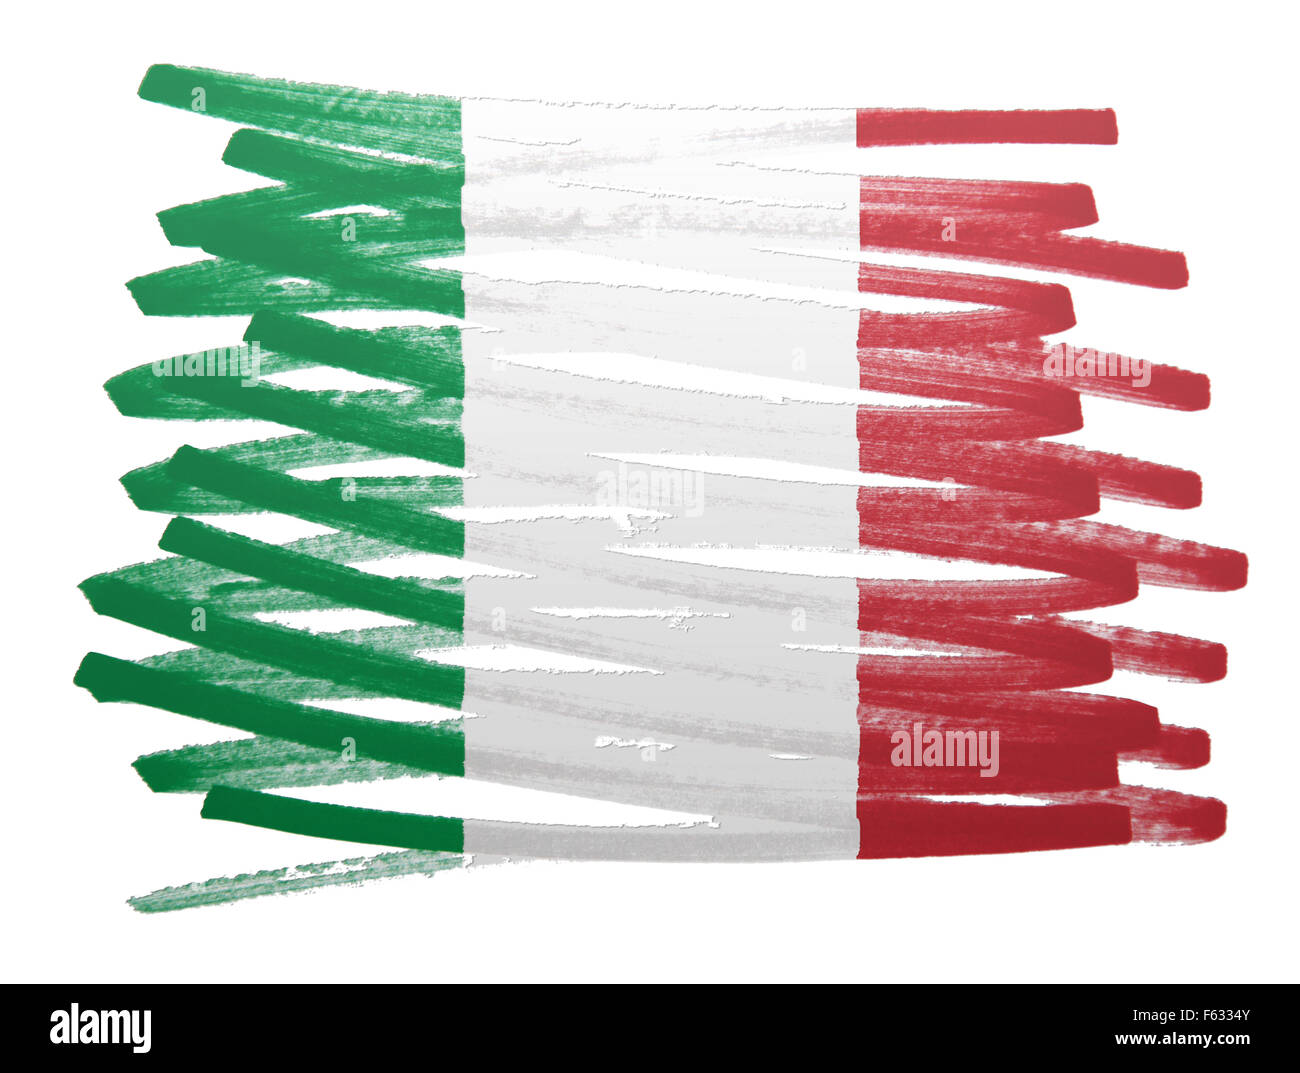 Flag illustration made with pen - Italy Stock Photo